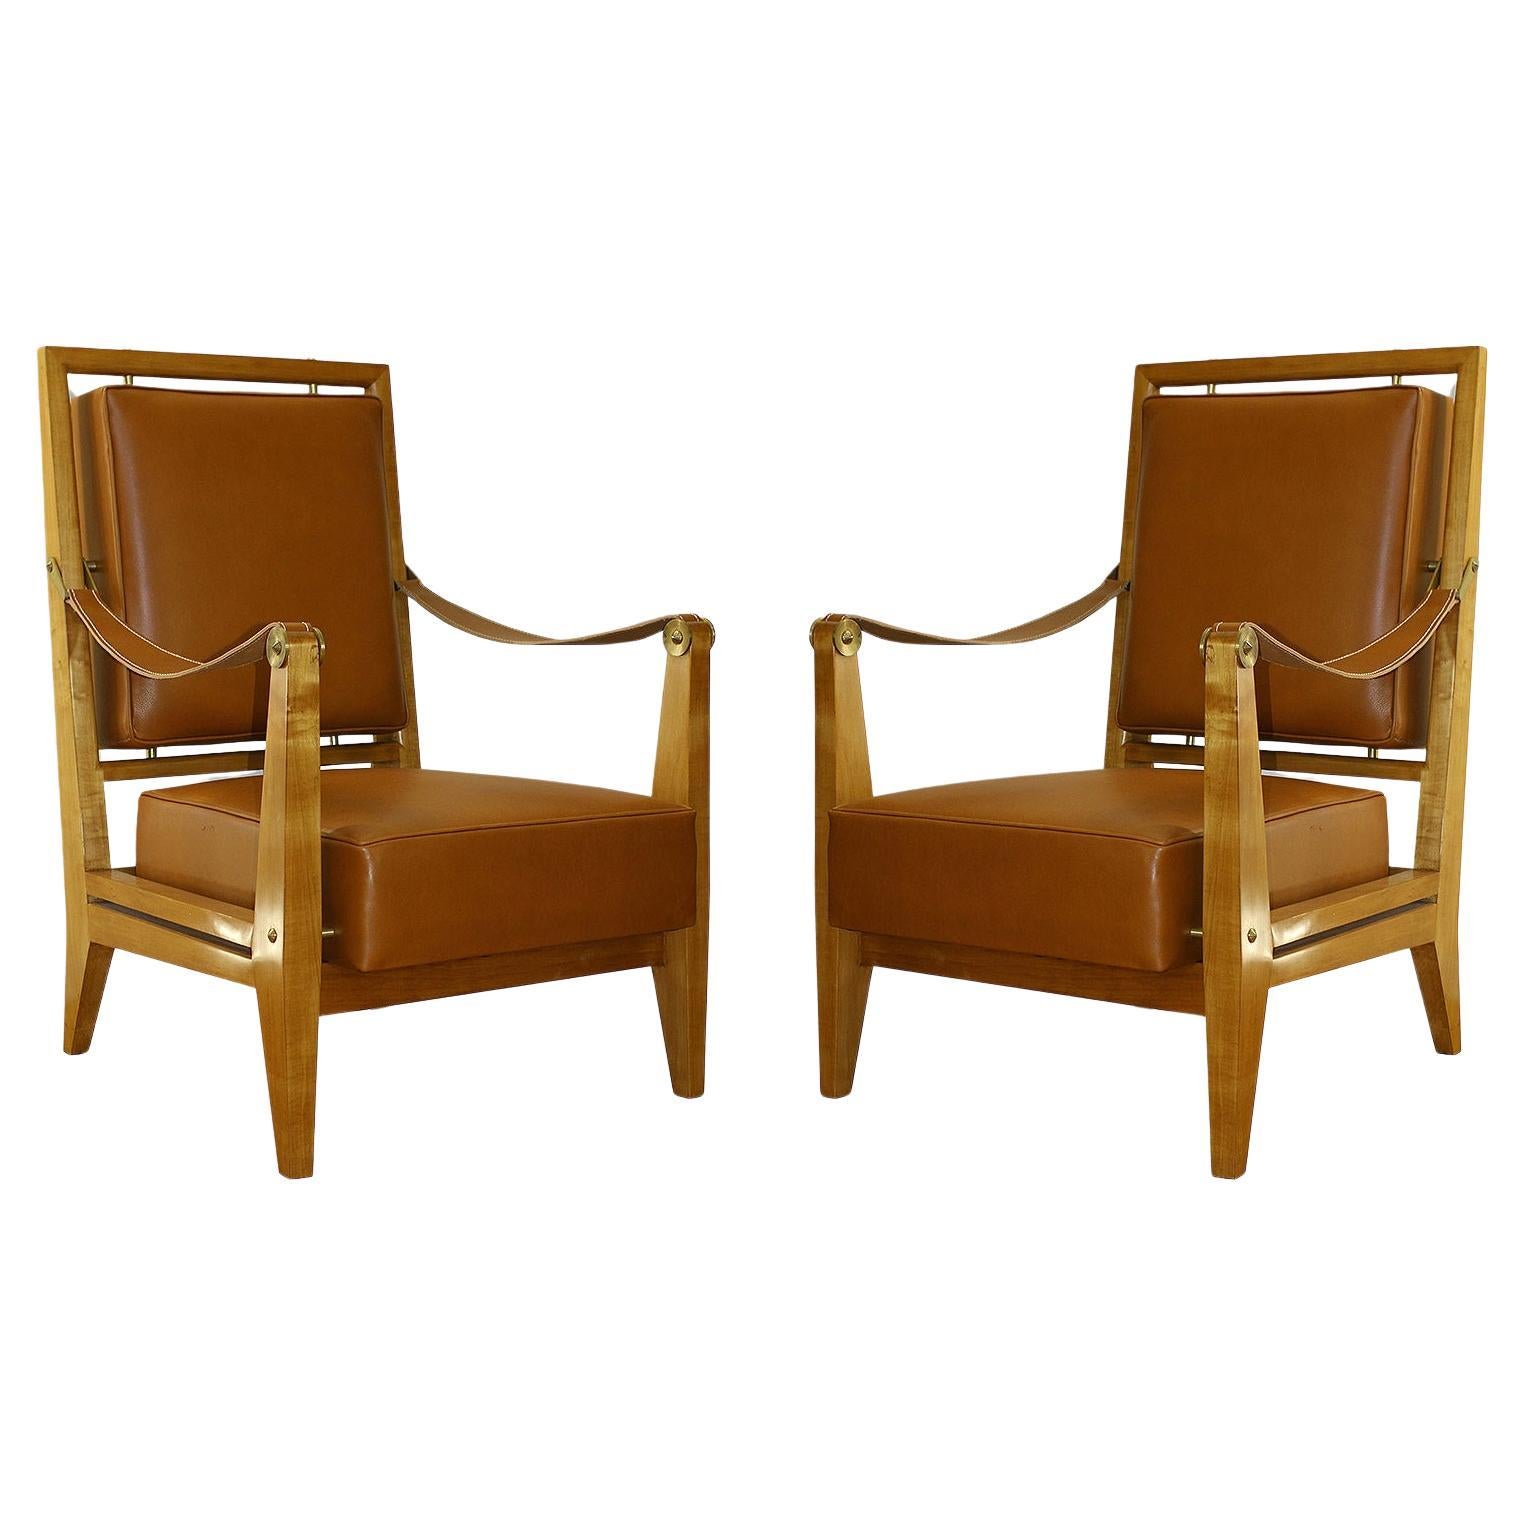 Maxime Old, Rare pair of armchairs from the Marhaba Hotel in Morocco For Sale